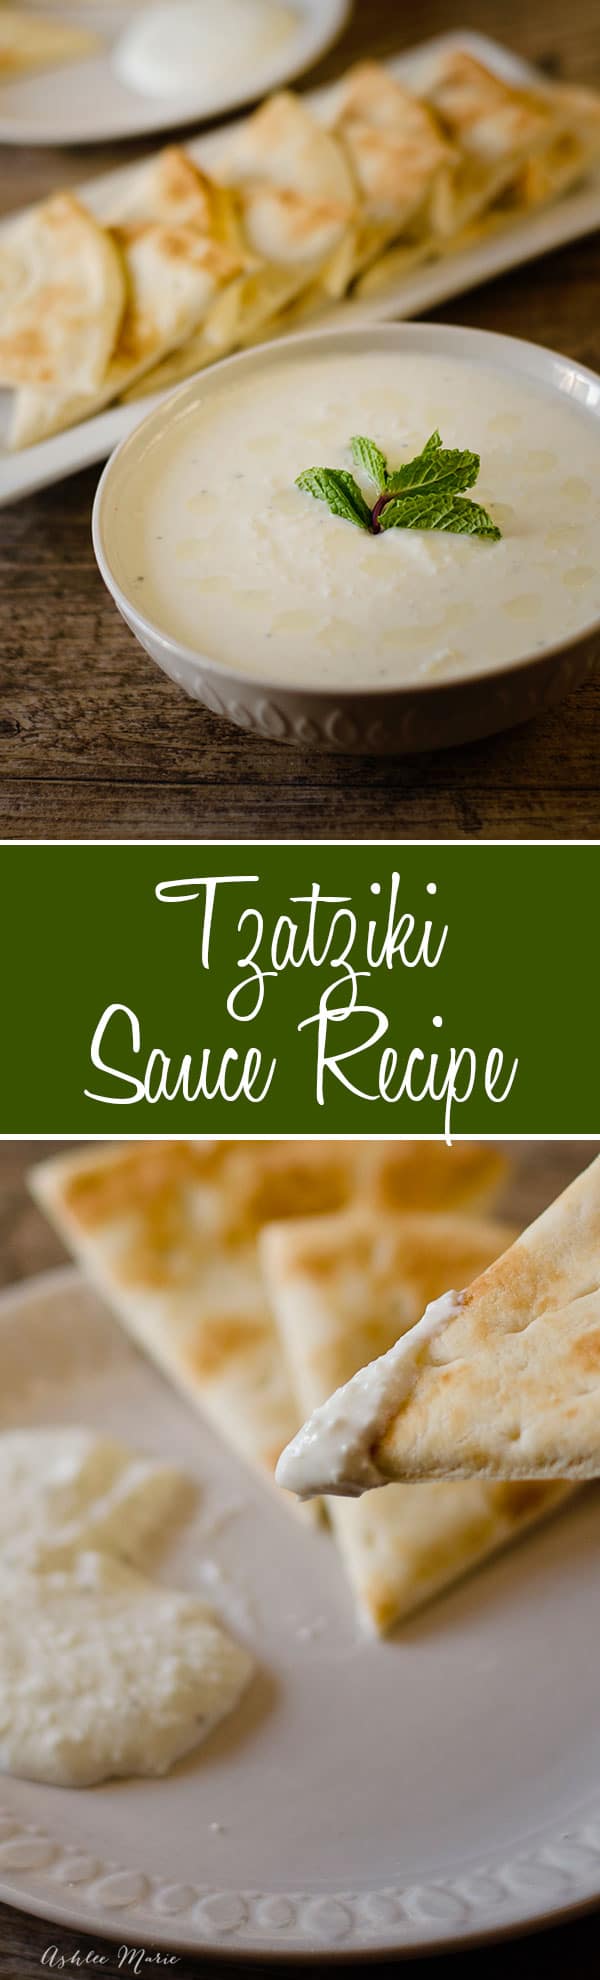 I love Greek food, and a staple in good greek food is an amazing Tzaziki sauce recipe. This one is it, i make it all the time to go with homemade gyro or just to enjoy with pita bread